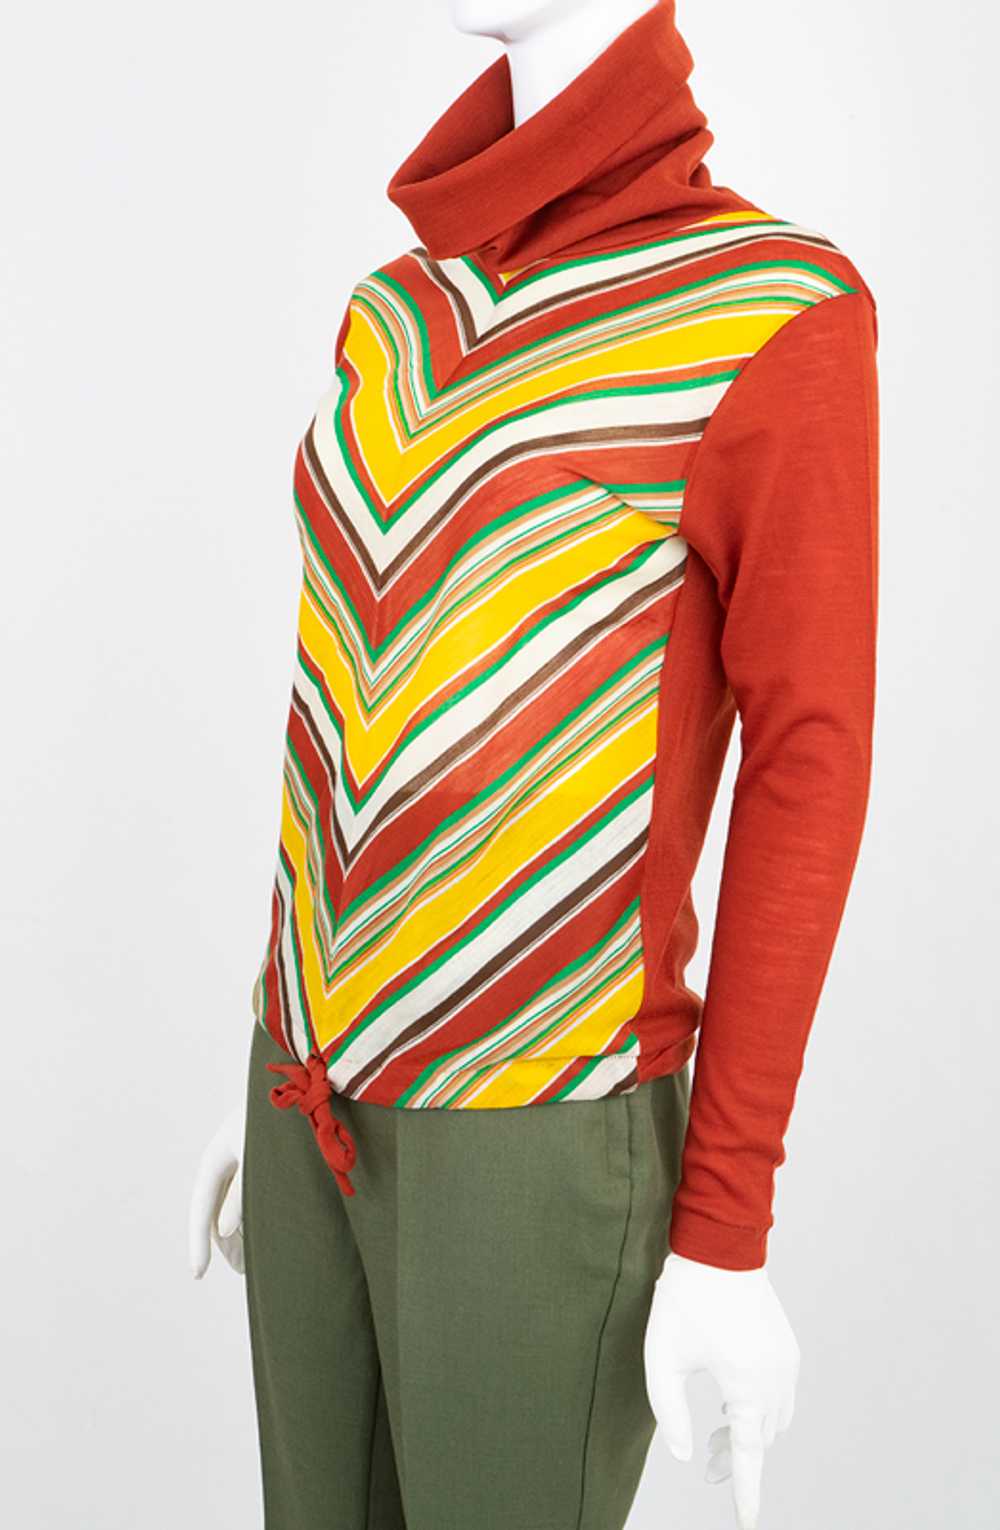 1970s Striped Cowl Neck Knit Top - image 2